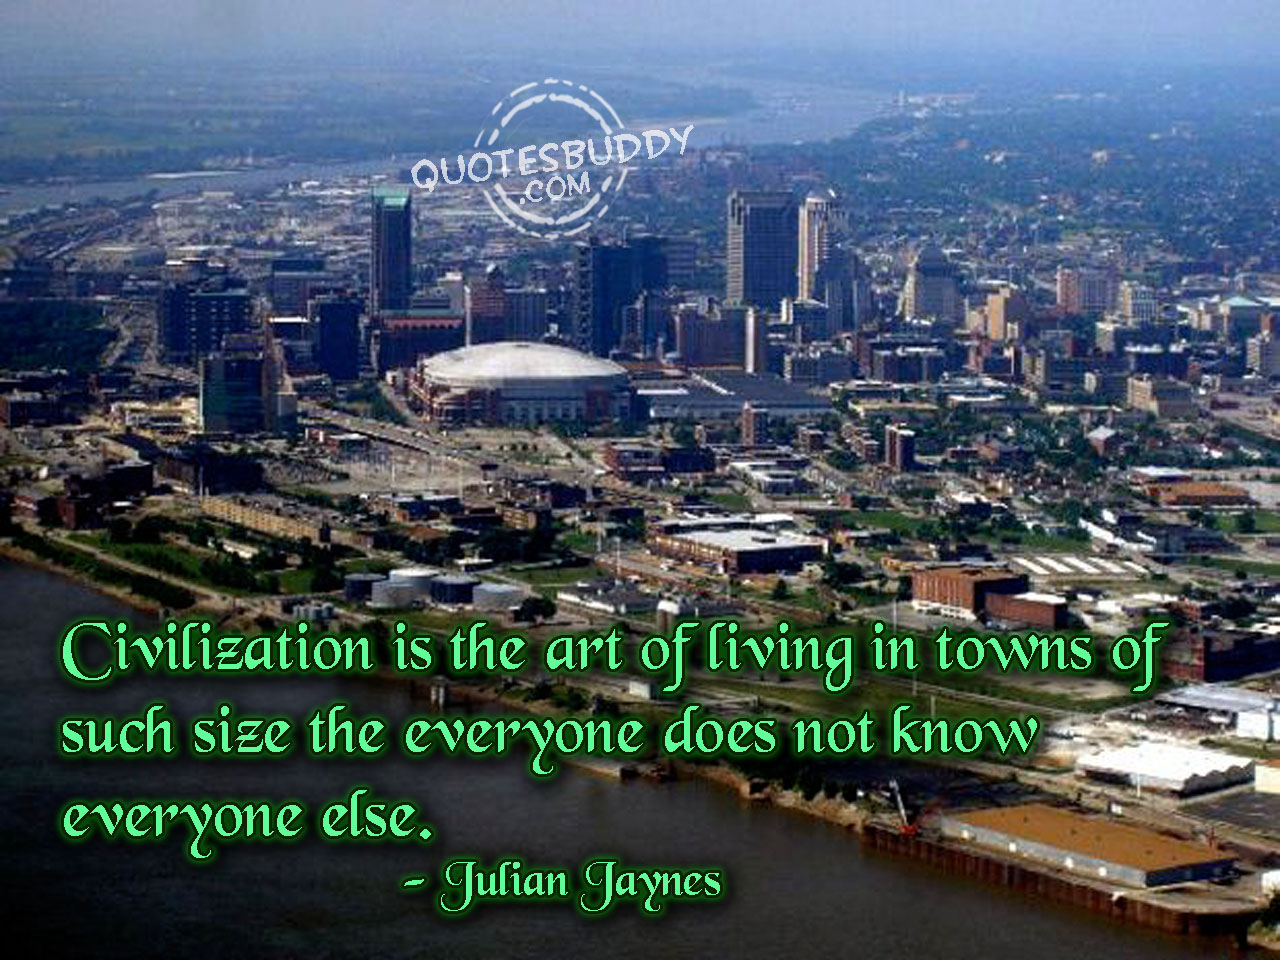 Civilization is the art of living in towns of such size the everyone does not know everyone else. Julian Jaynes